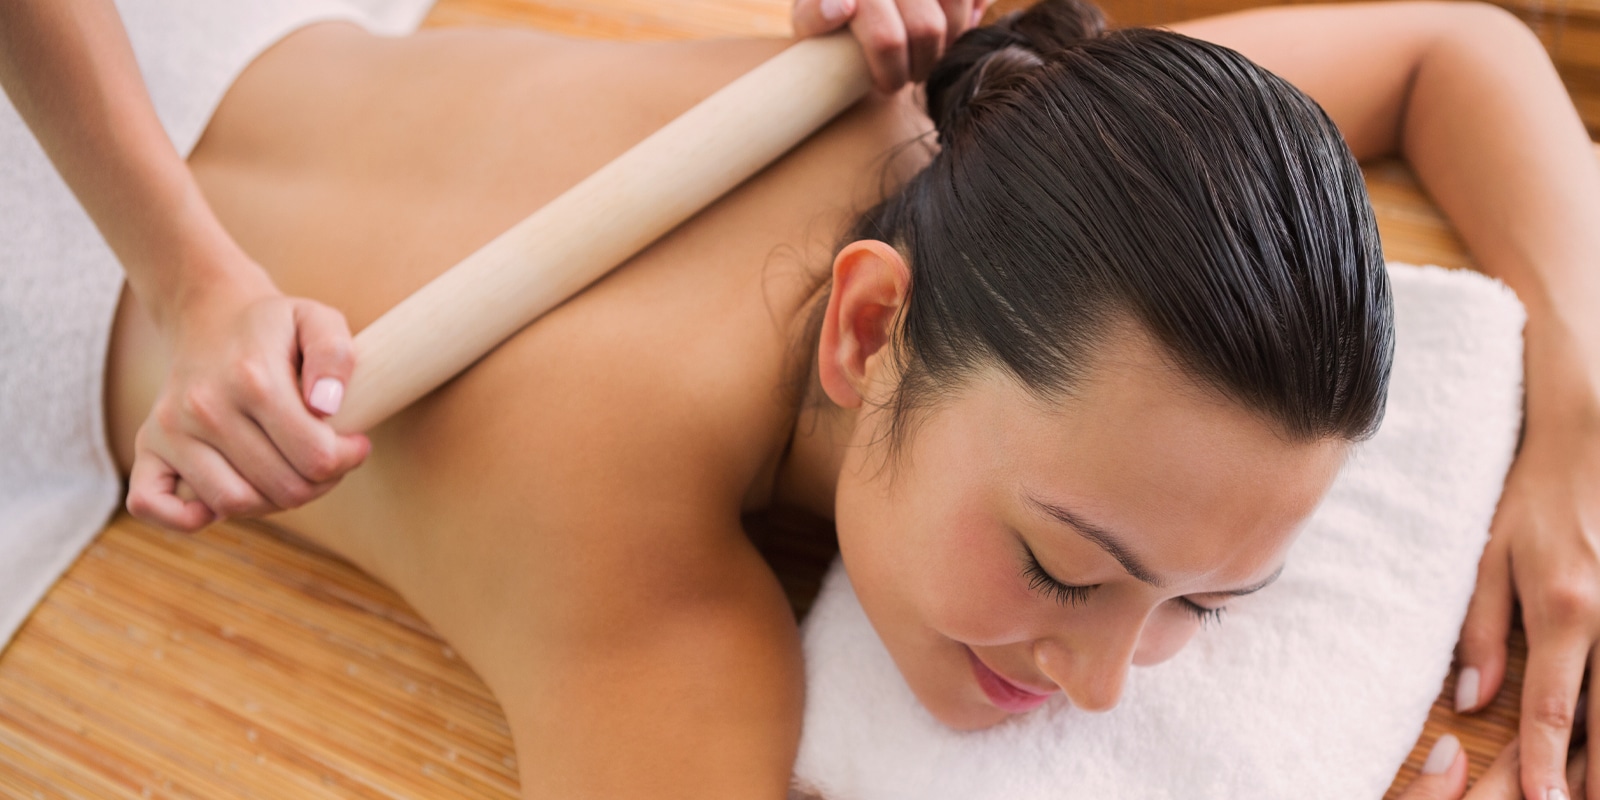 An image of a woman getting a bamboo massage